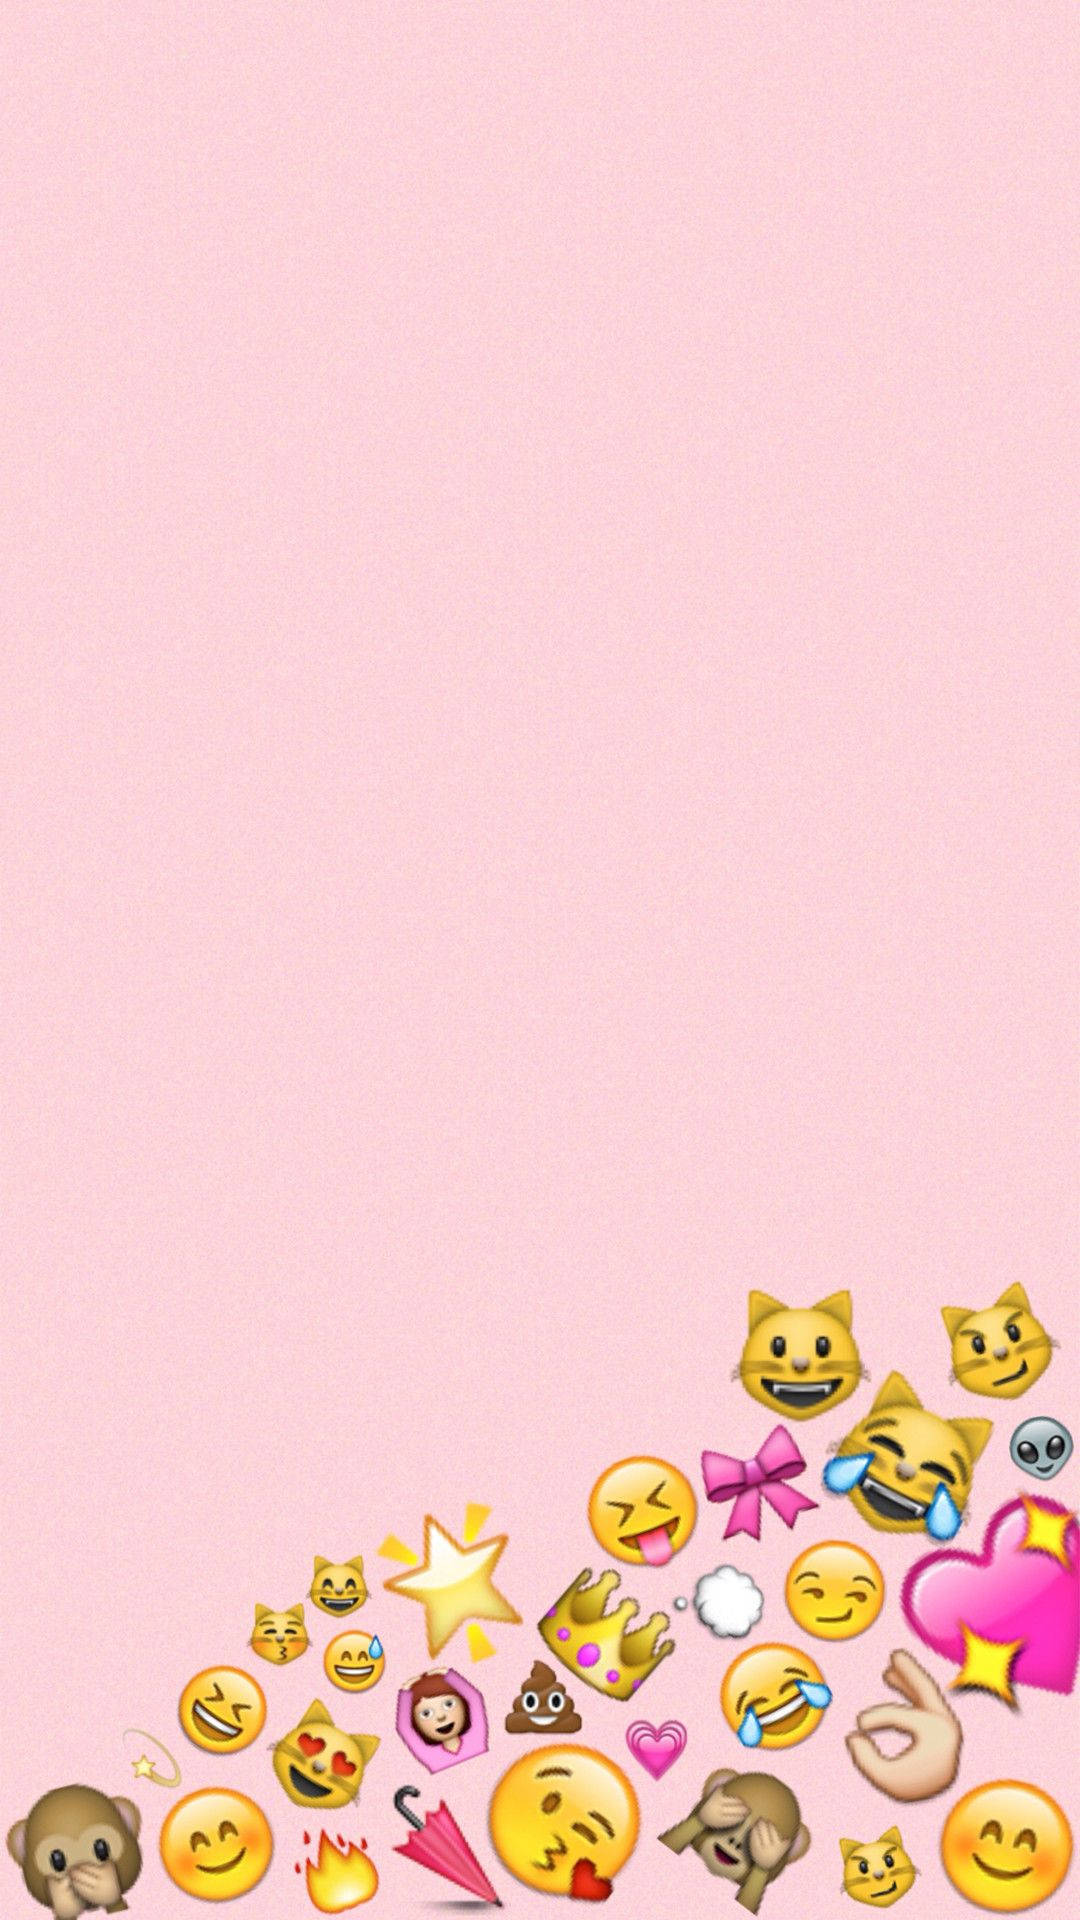 Express Yourself with Cute Girly Emojis Wallpaper